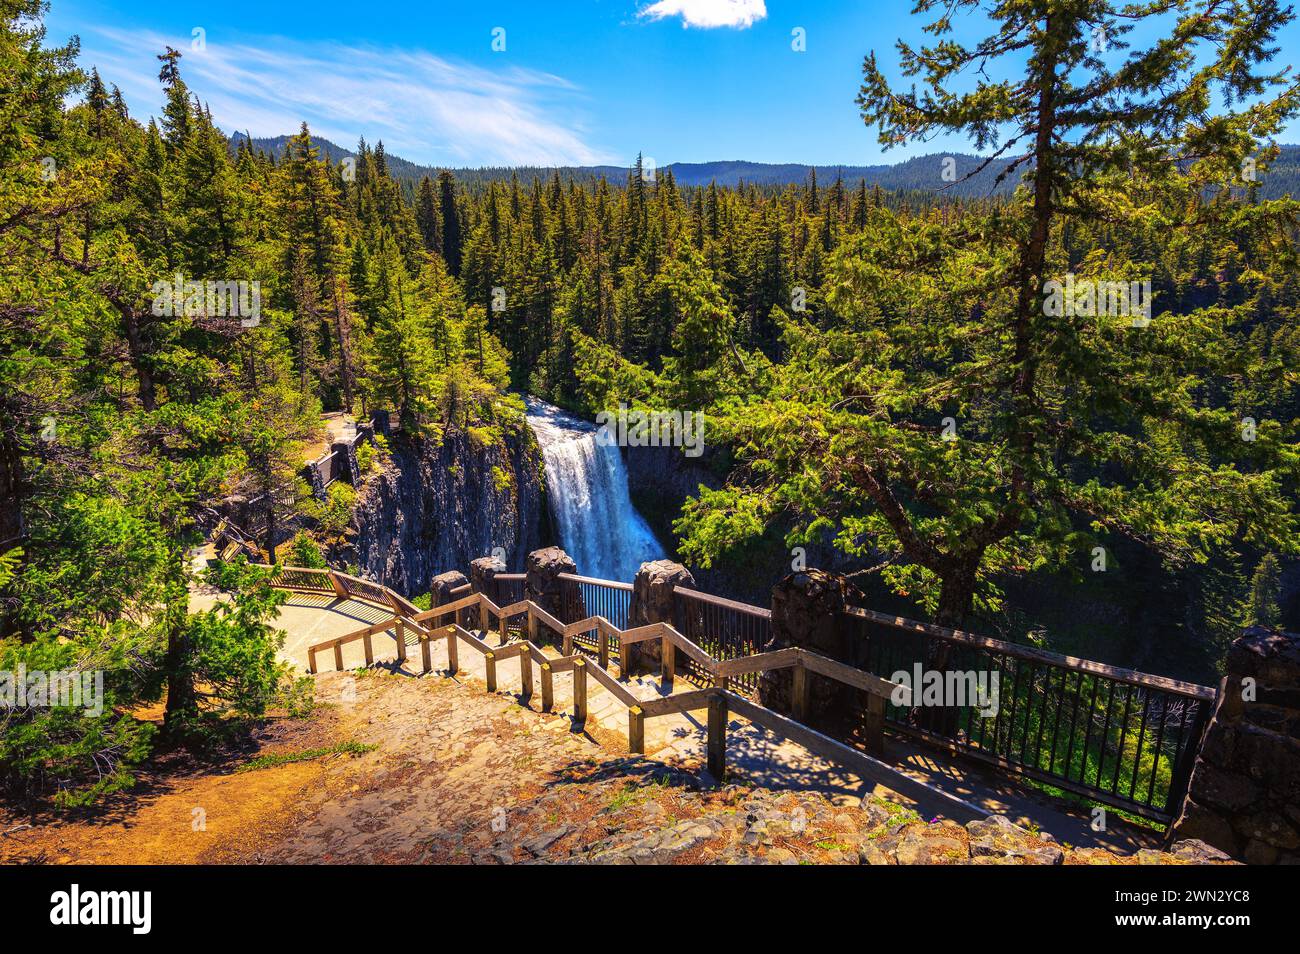 Salt Creek Falls with a wooden railing in Oregon, USA Stock Photo